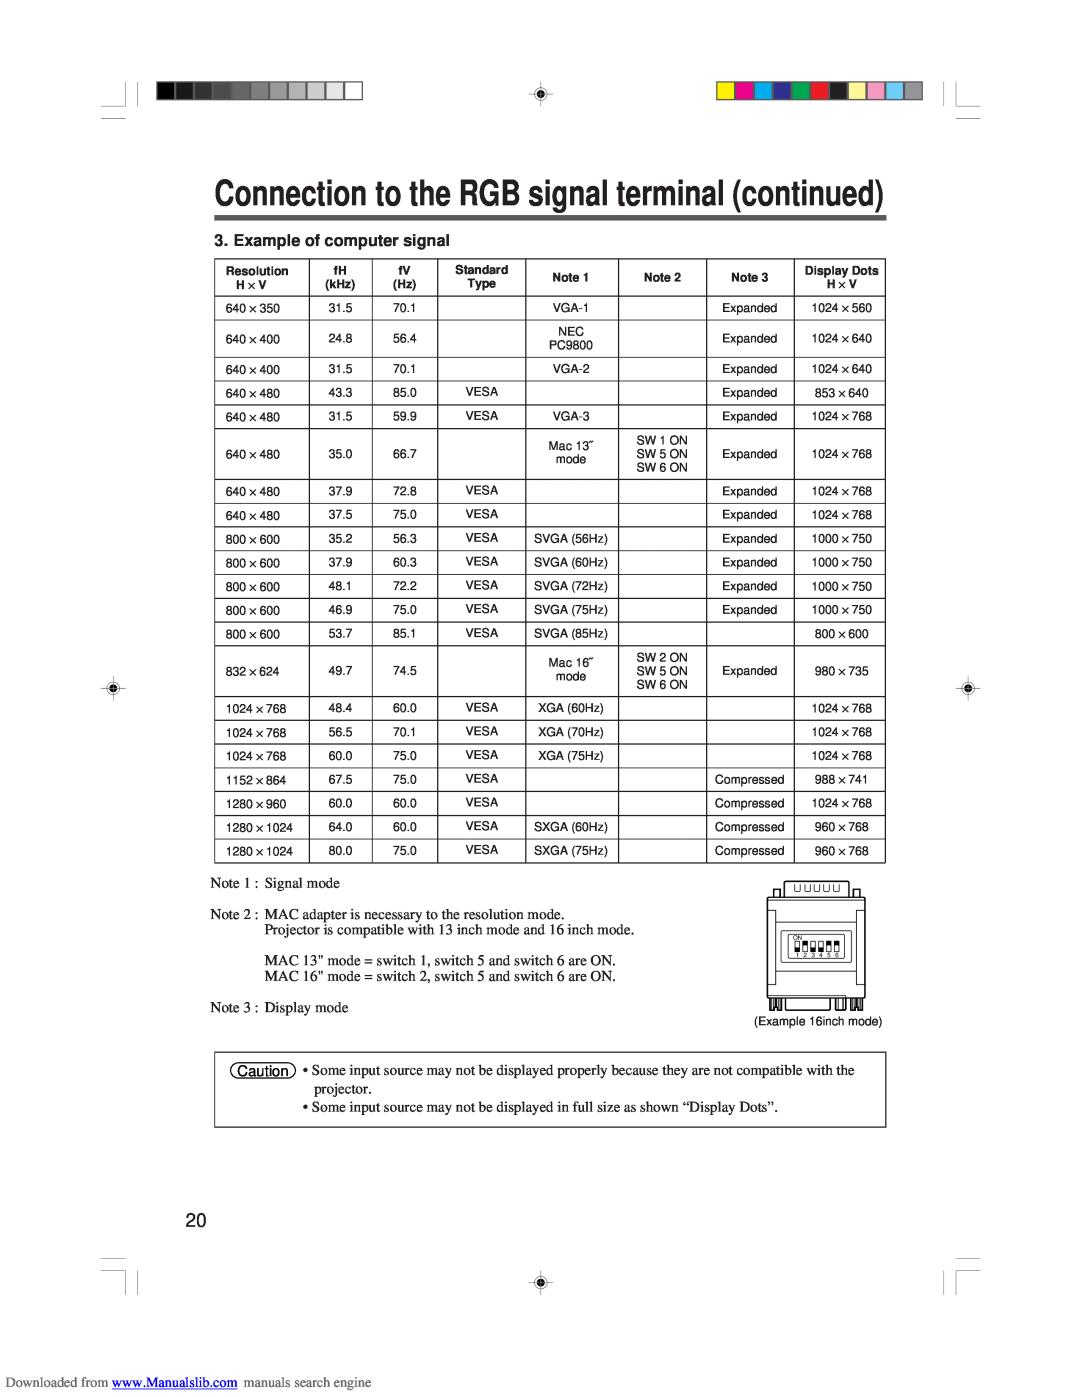 Hitachi CP-X955E specifications Connection to the RGB signal terminal continued, Example of computer signal 